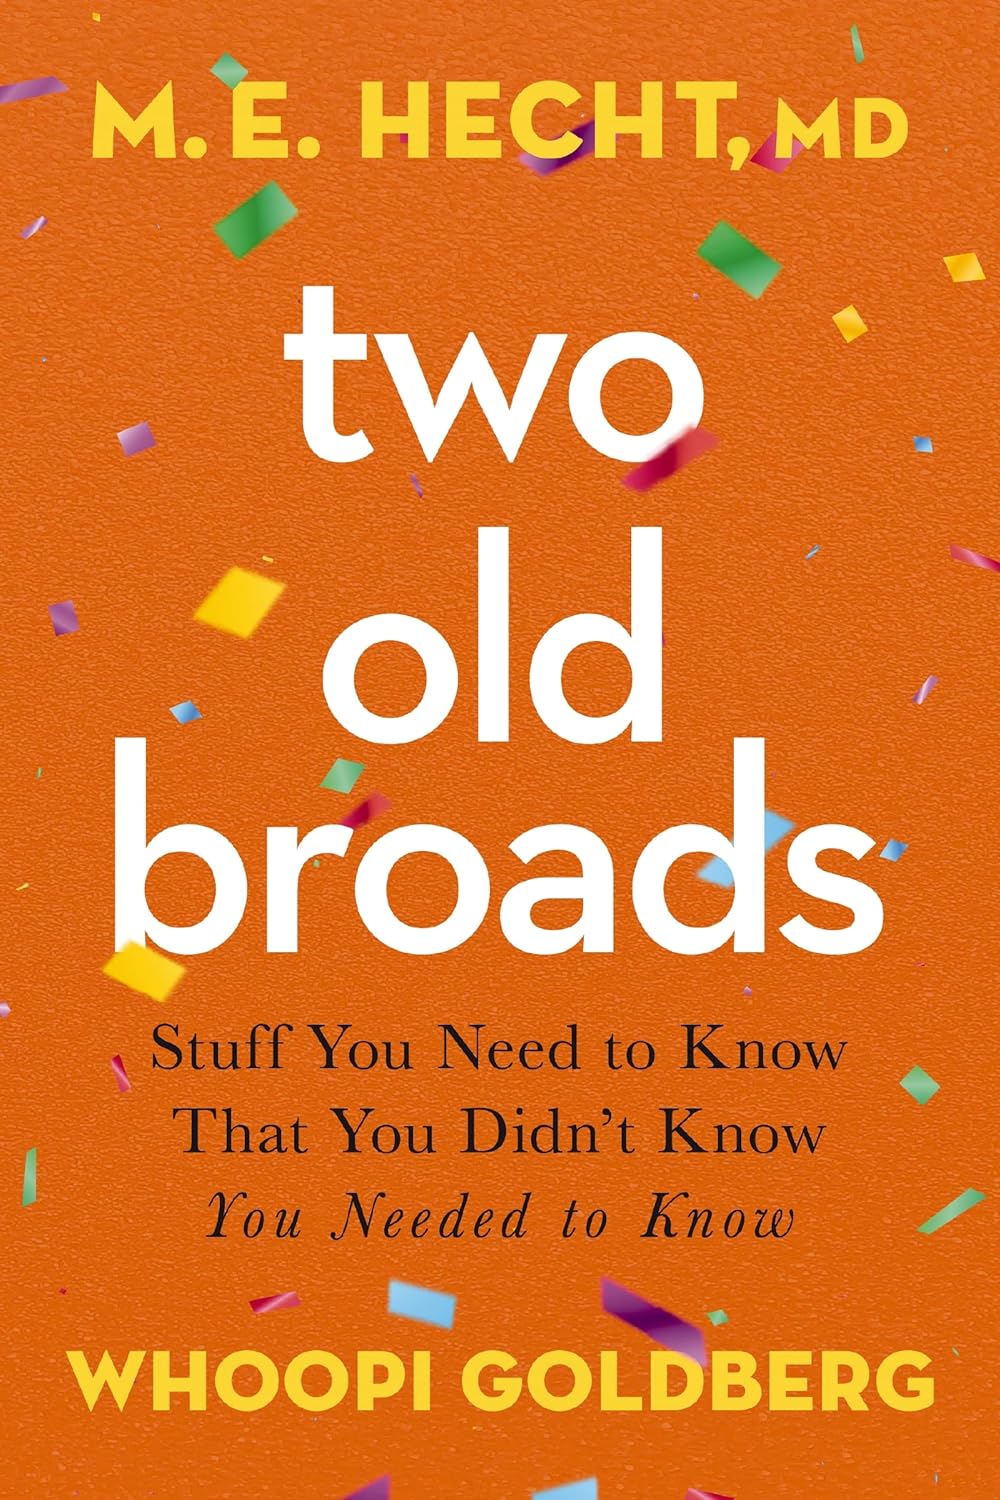 Two Old Broads Stuff You Need to Know That You Didn't Know You Needed to Know - Street Smart - SureShot Books Publishing LLC